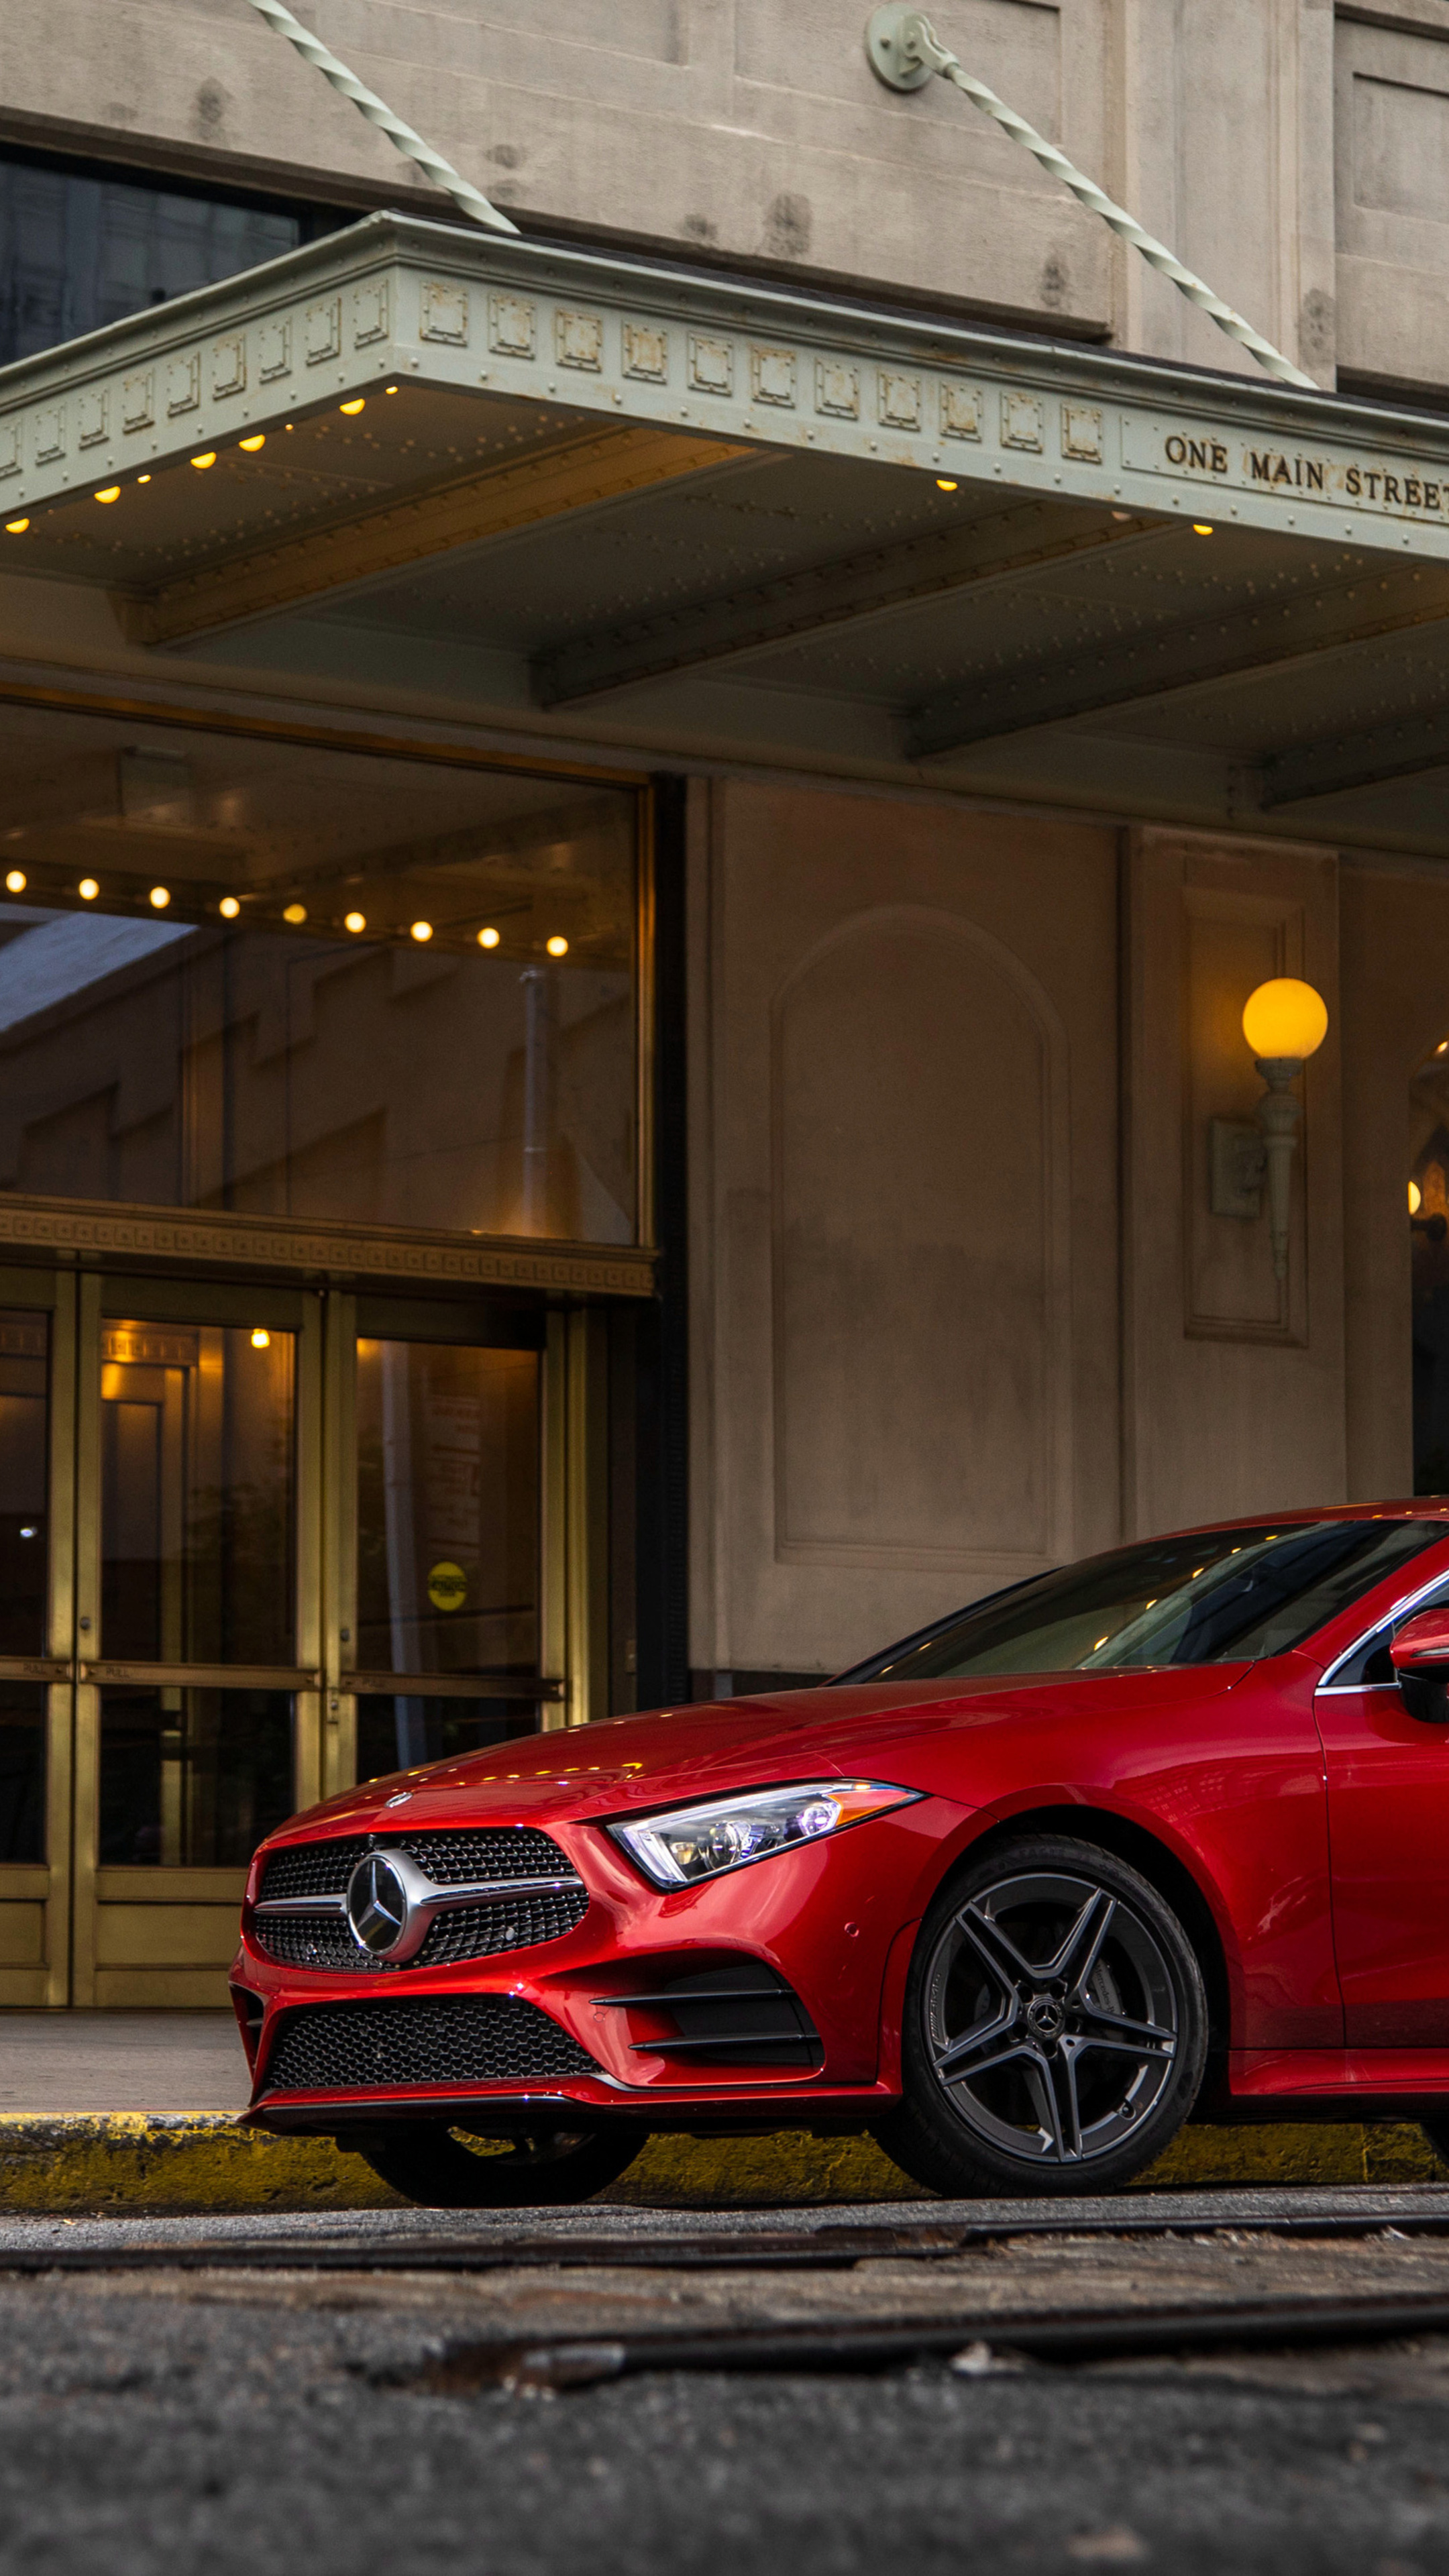 Mercedes-Benz CLS 450 AMG, Sony Xperia X, High-quality wallpapers, AMG performance, 2160x3840 4K Phone